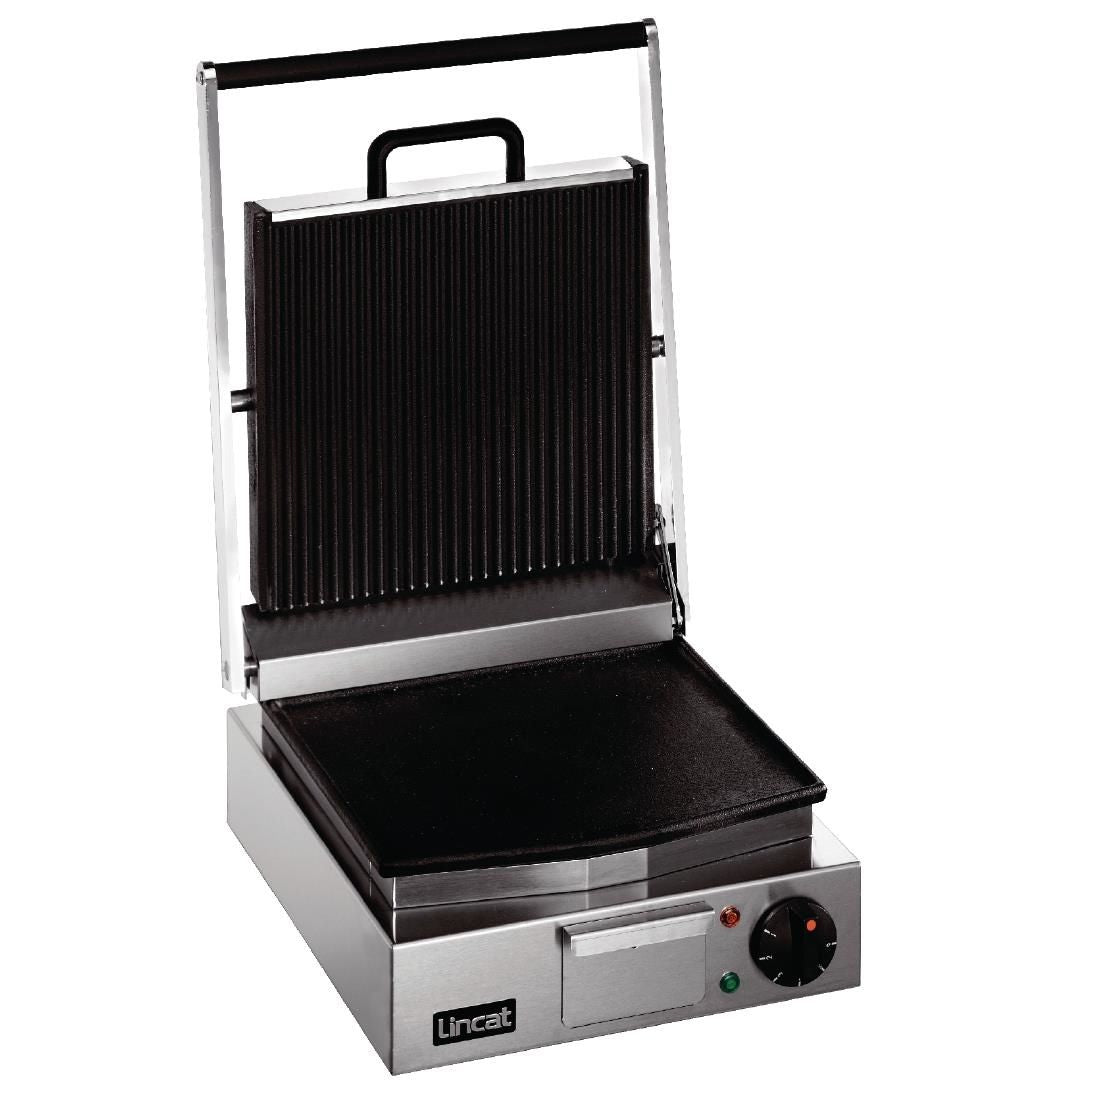 LRG - Lincat Lynx 400 Electric Counter-top Single Ribbed Grill - Ribbed Upper & Smooth Lower Plates - W 310 mm - 2.25 kW CD422 JD Catering Equipment Solutions Ltd